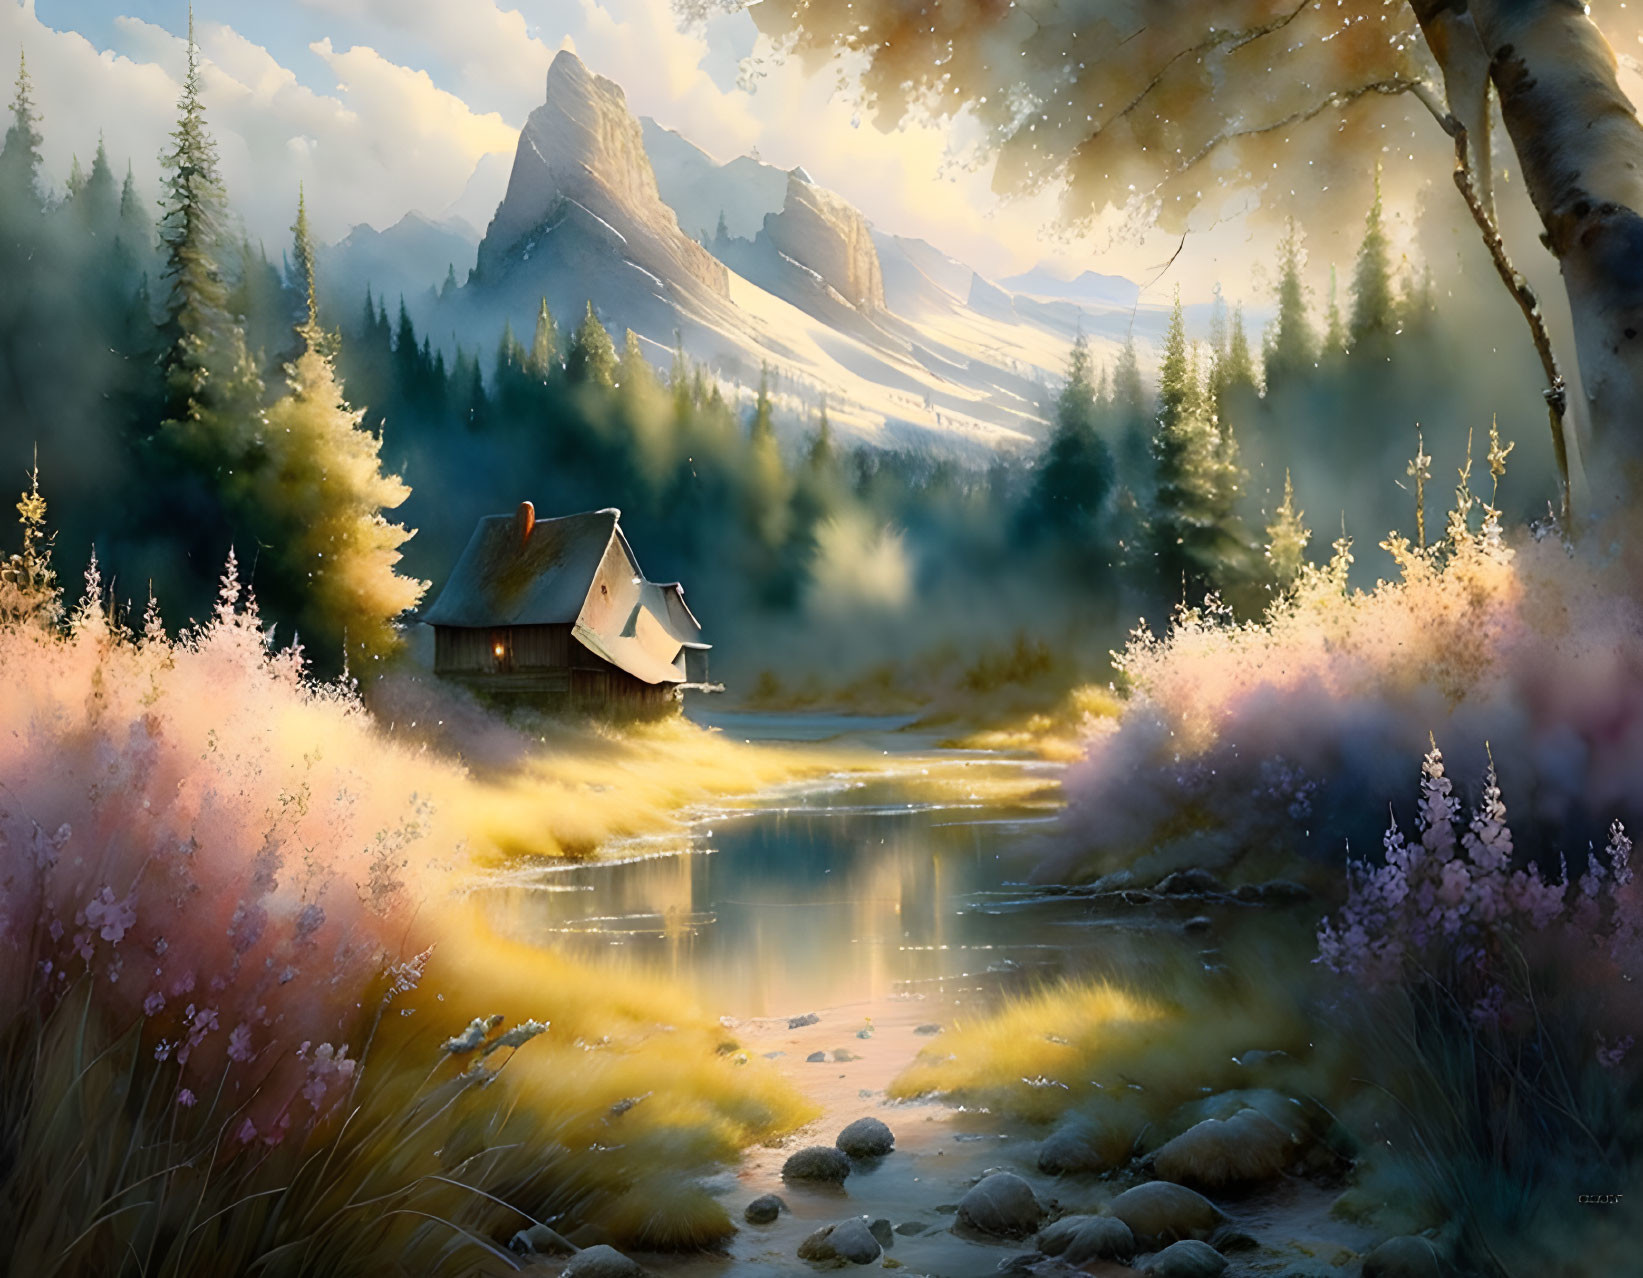 Tranquil landscape with cottage, river, trees, wildflowers, and mountain